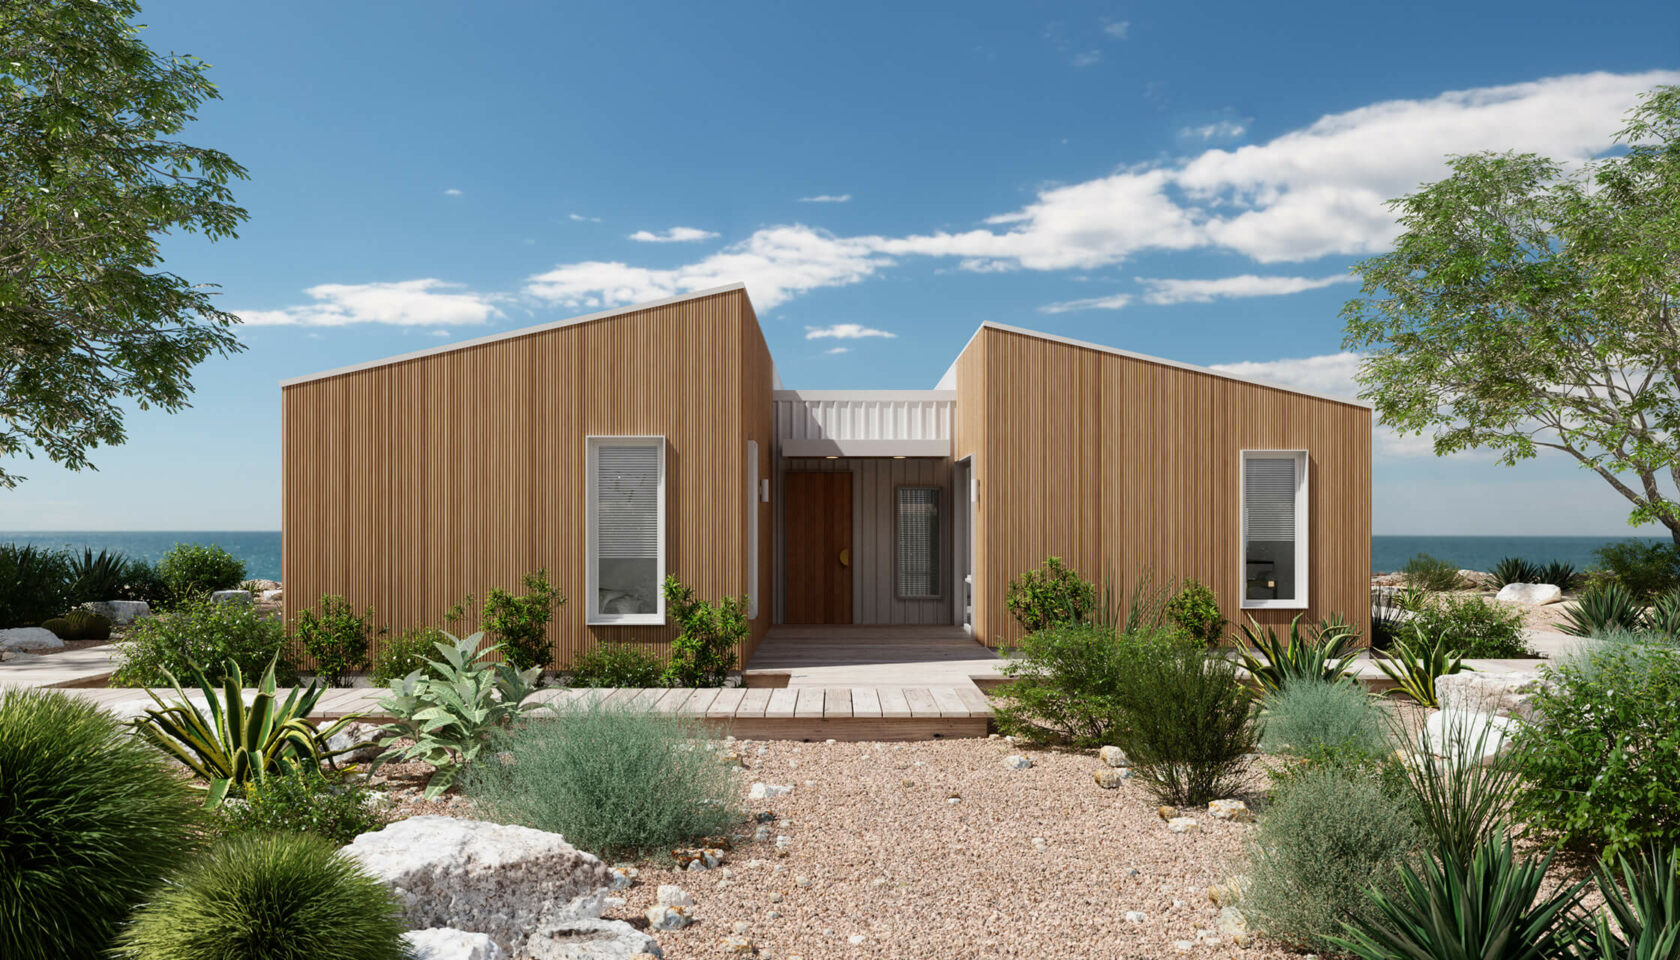 front view of pique's breeze 3 bedroom prefab homes design during the day